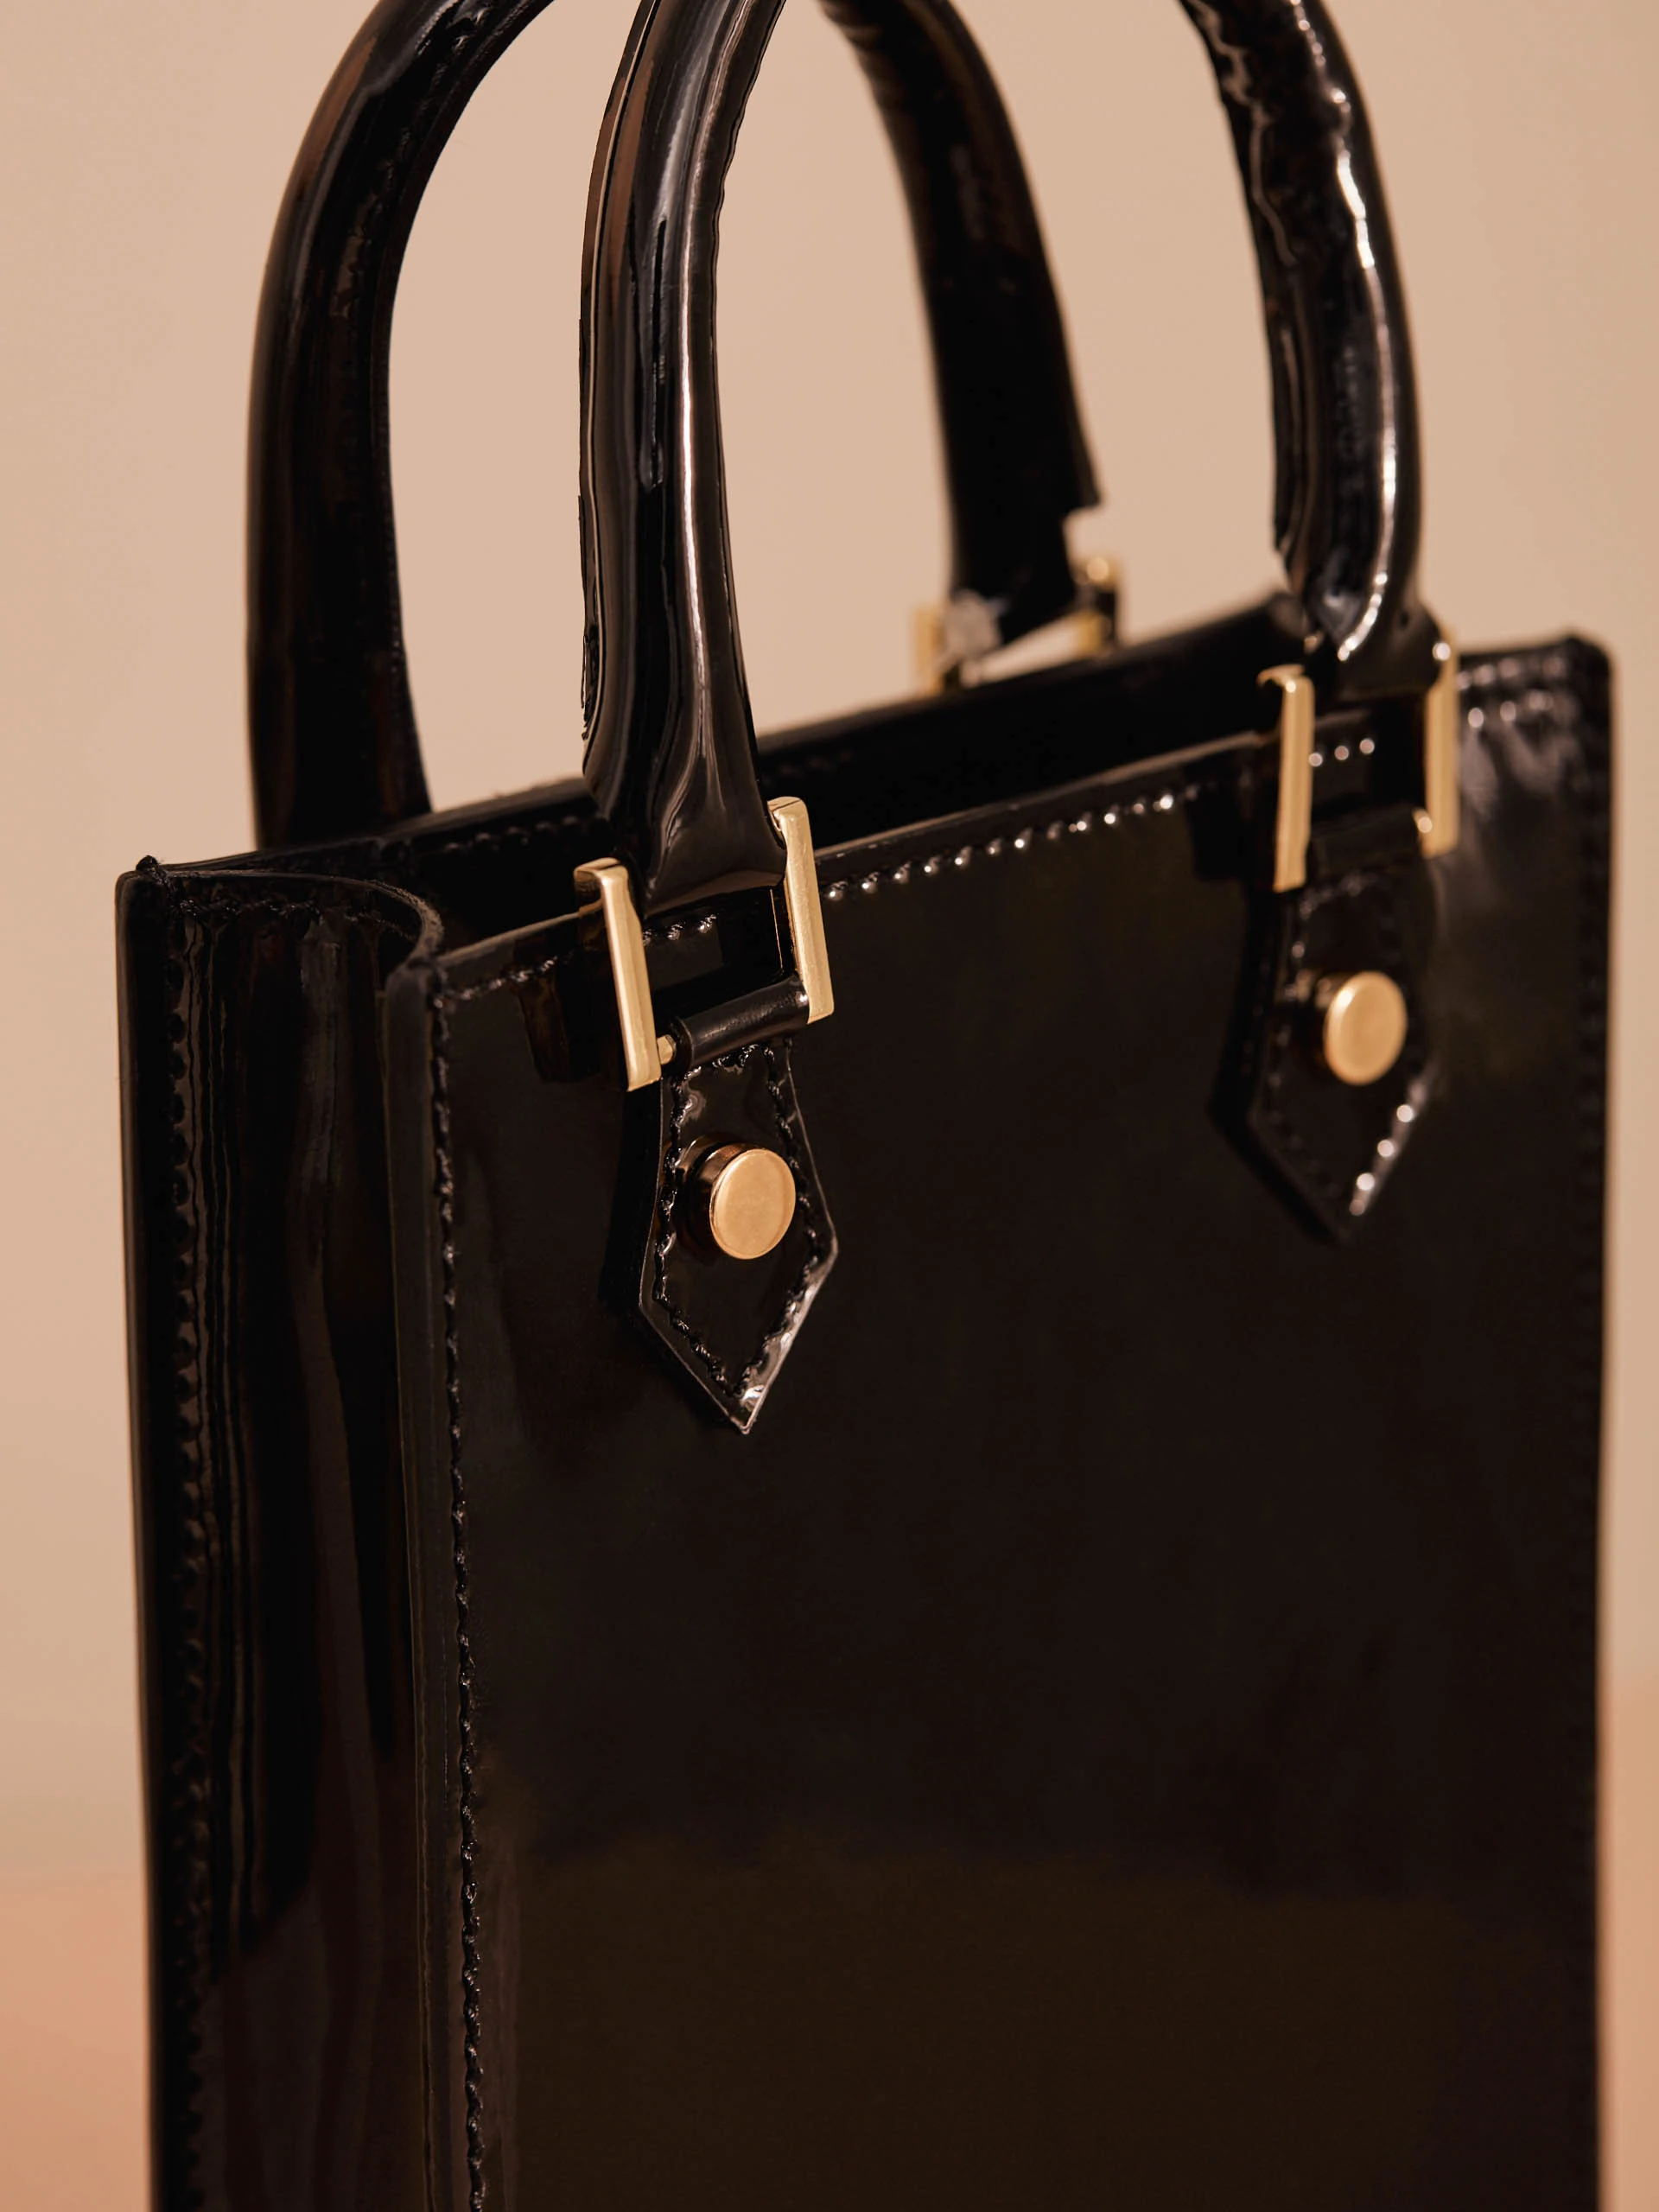 SMALL HANDBAG IN PATENT LEATHER